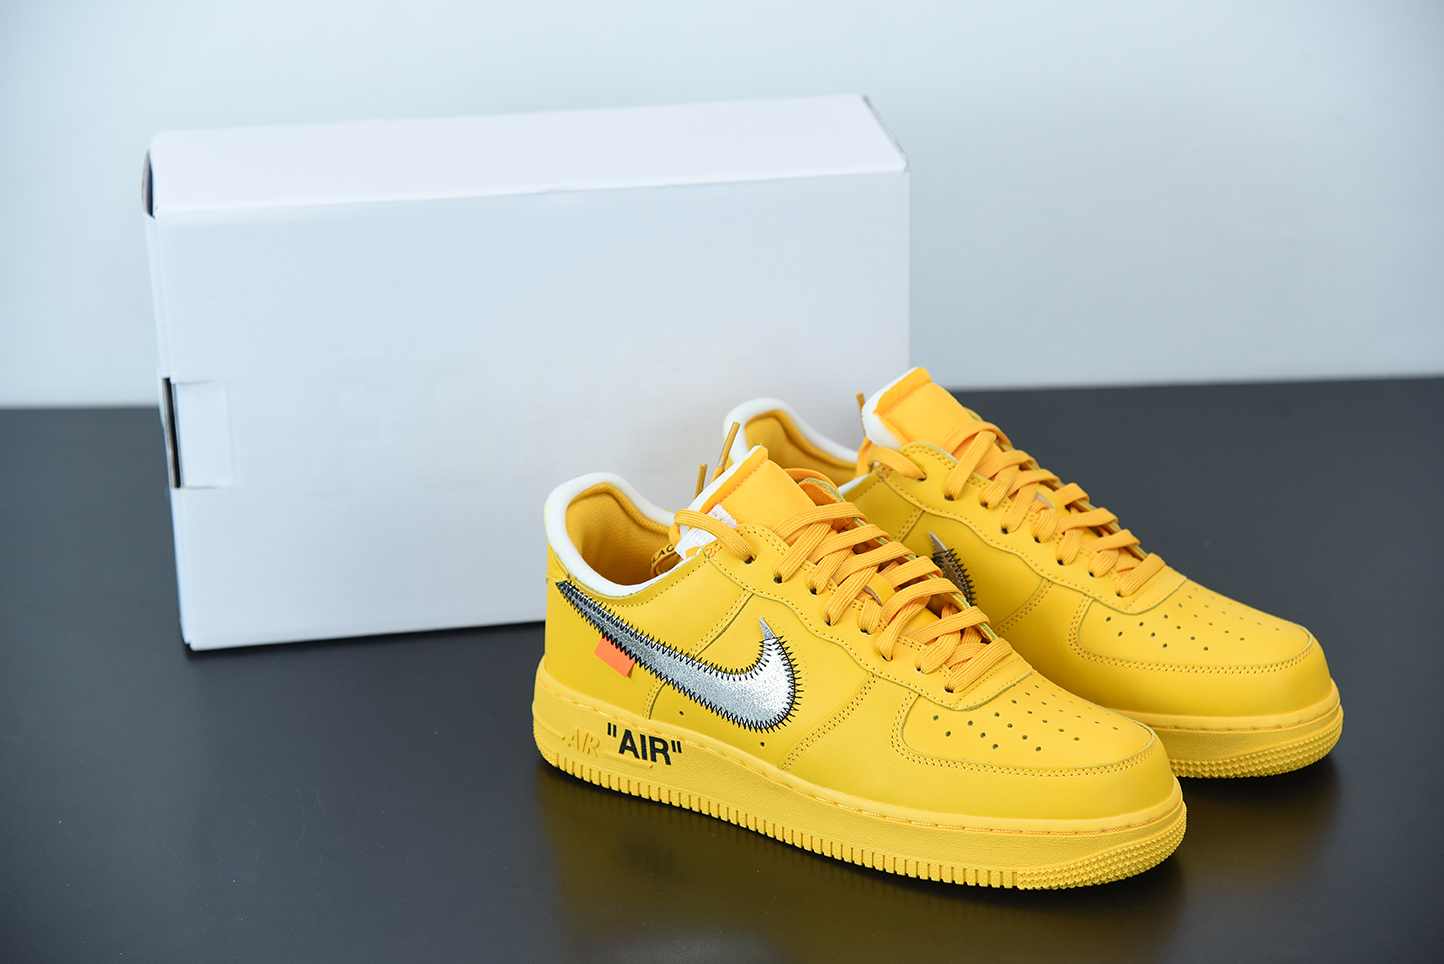 The Off-White x Nike Air Force 1 'University Gold' Is Selling for